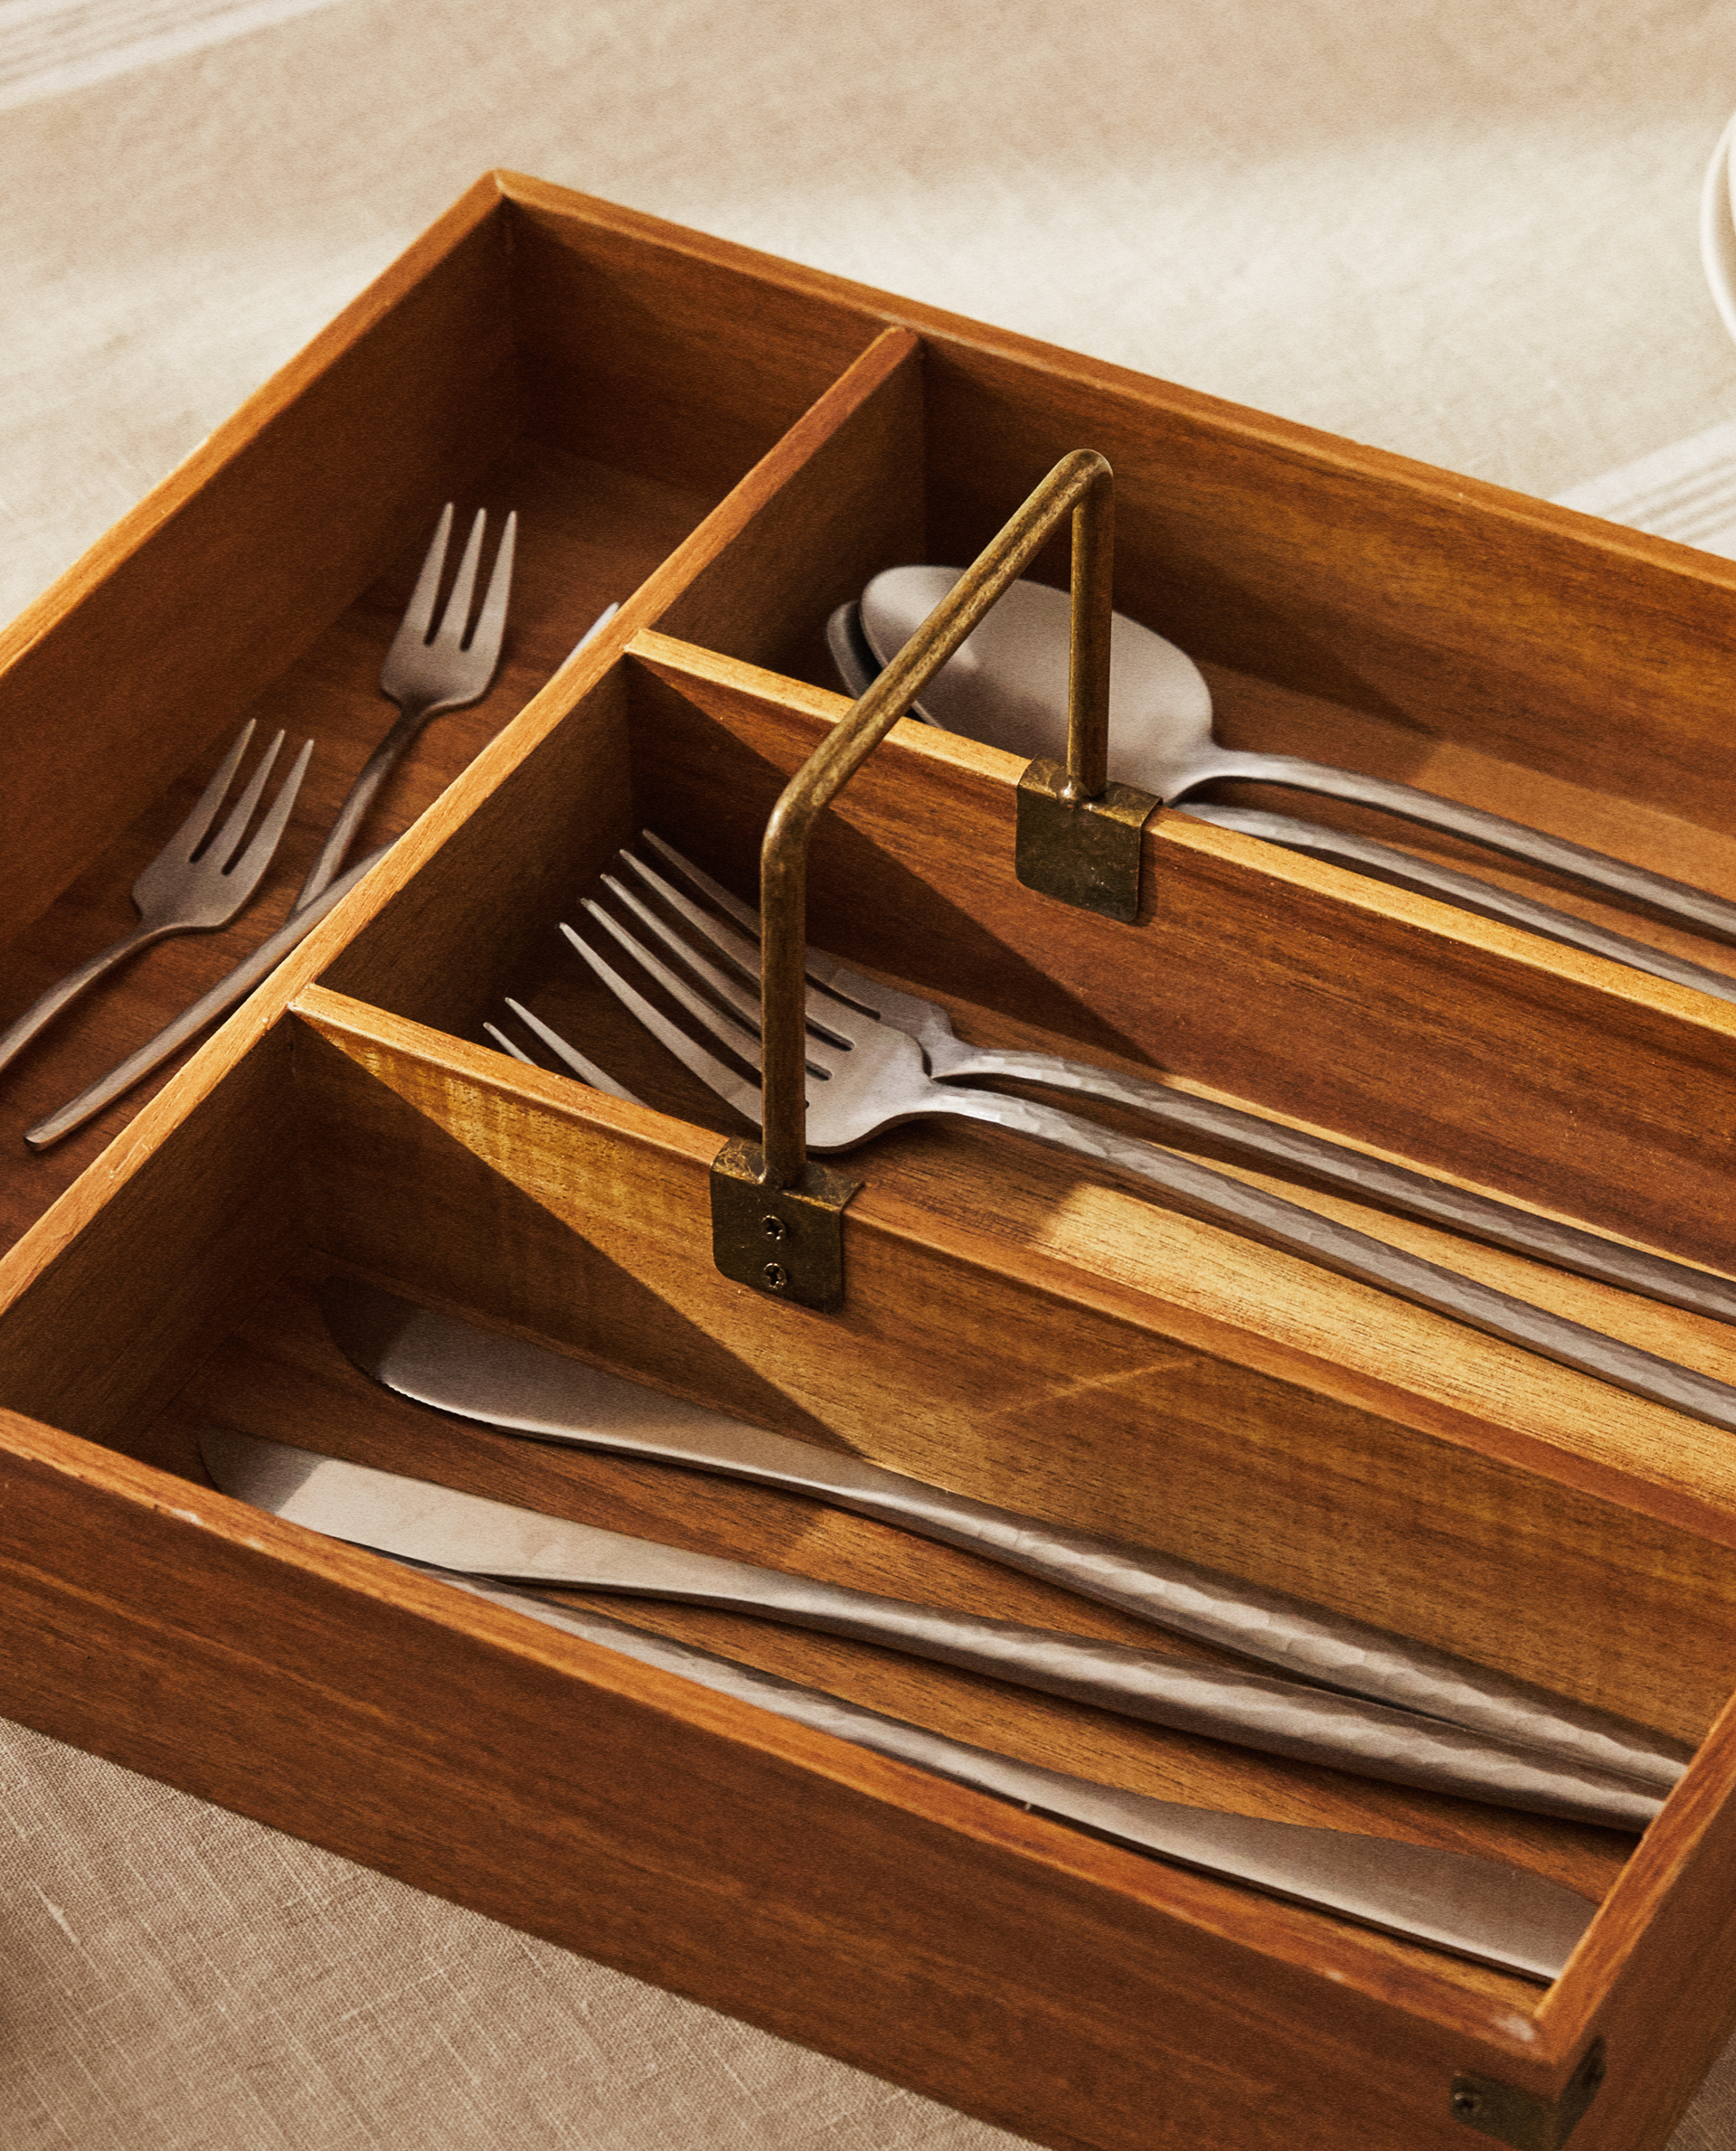 Wooden Cutlery Tray With Handle, Wooden Utensil Tray